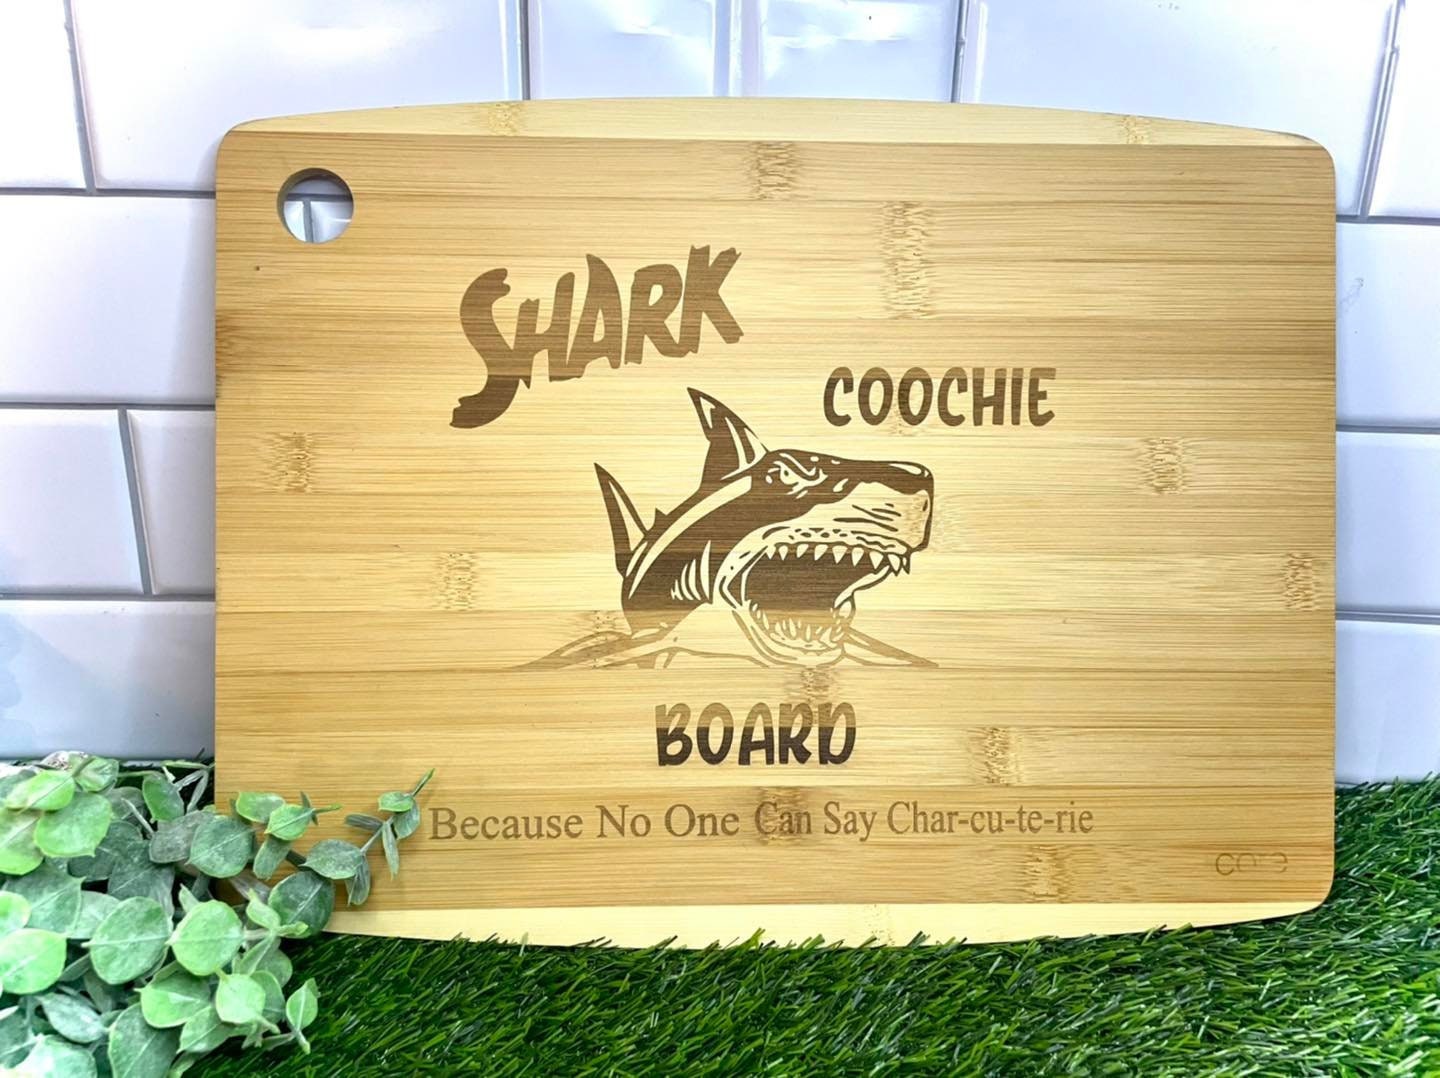 SHARK COOCHIE BOARD, Shark Coochie Charcuterie, White Elephant Gift, Serving Board, Serving Tray, cutting board, gift for him, wedding gift